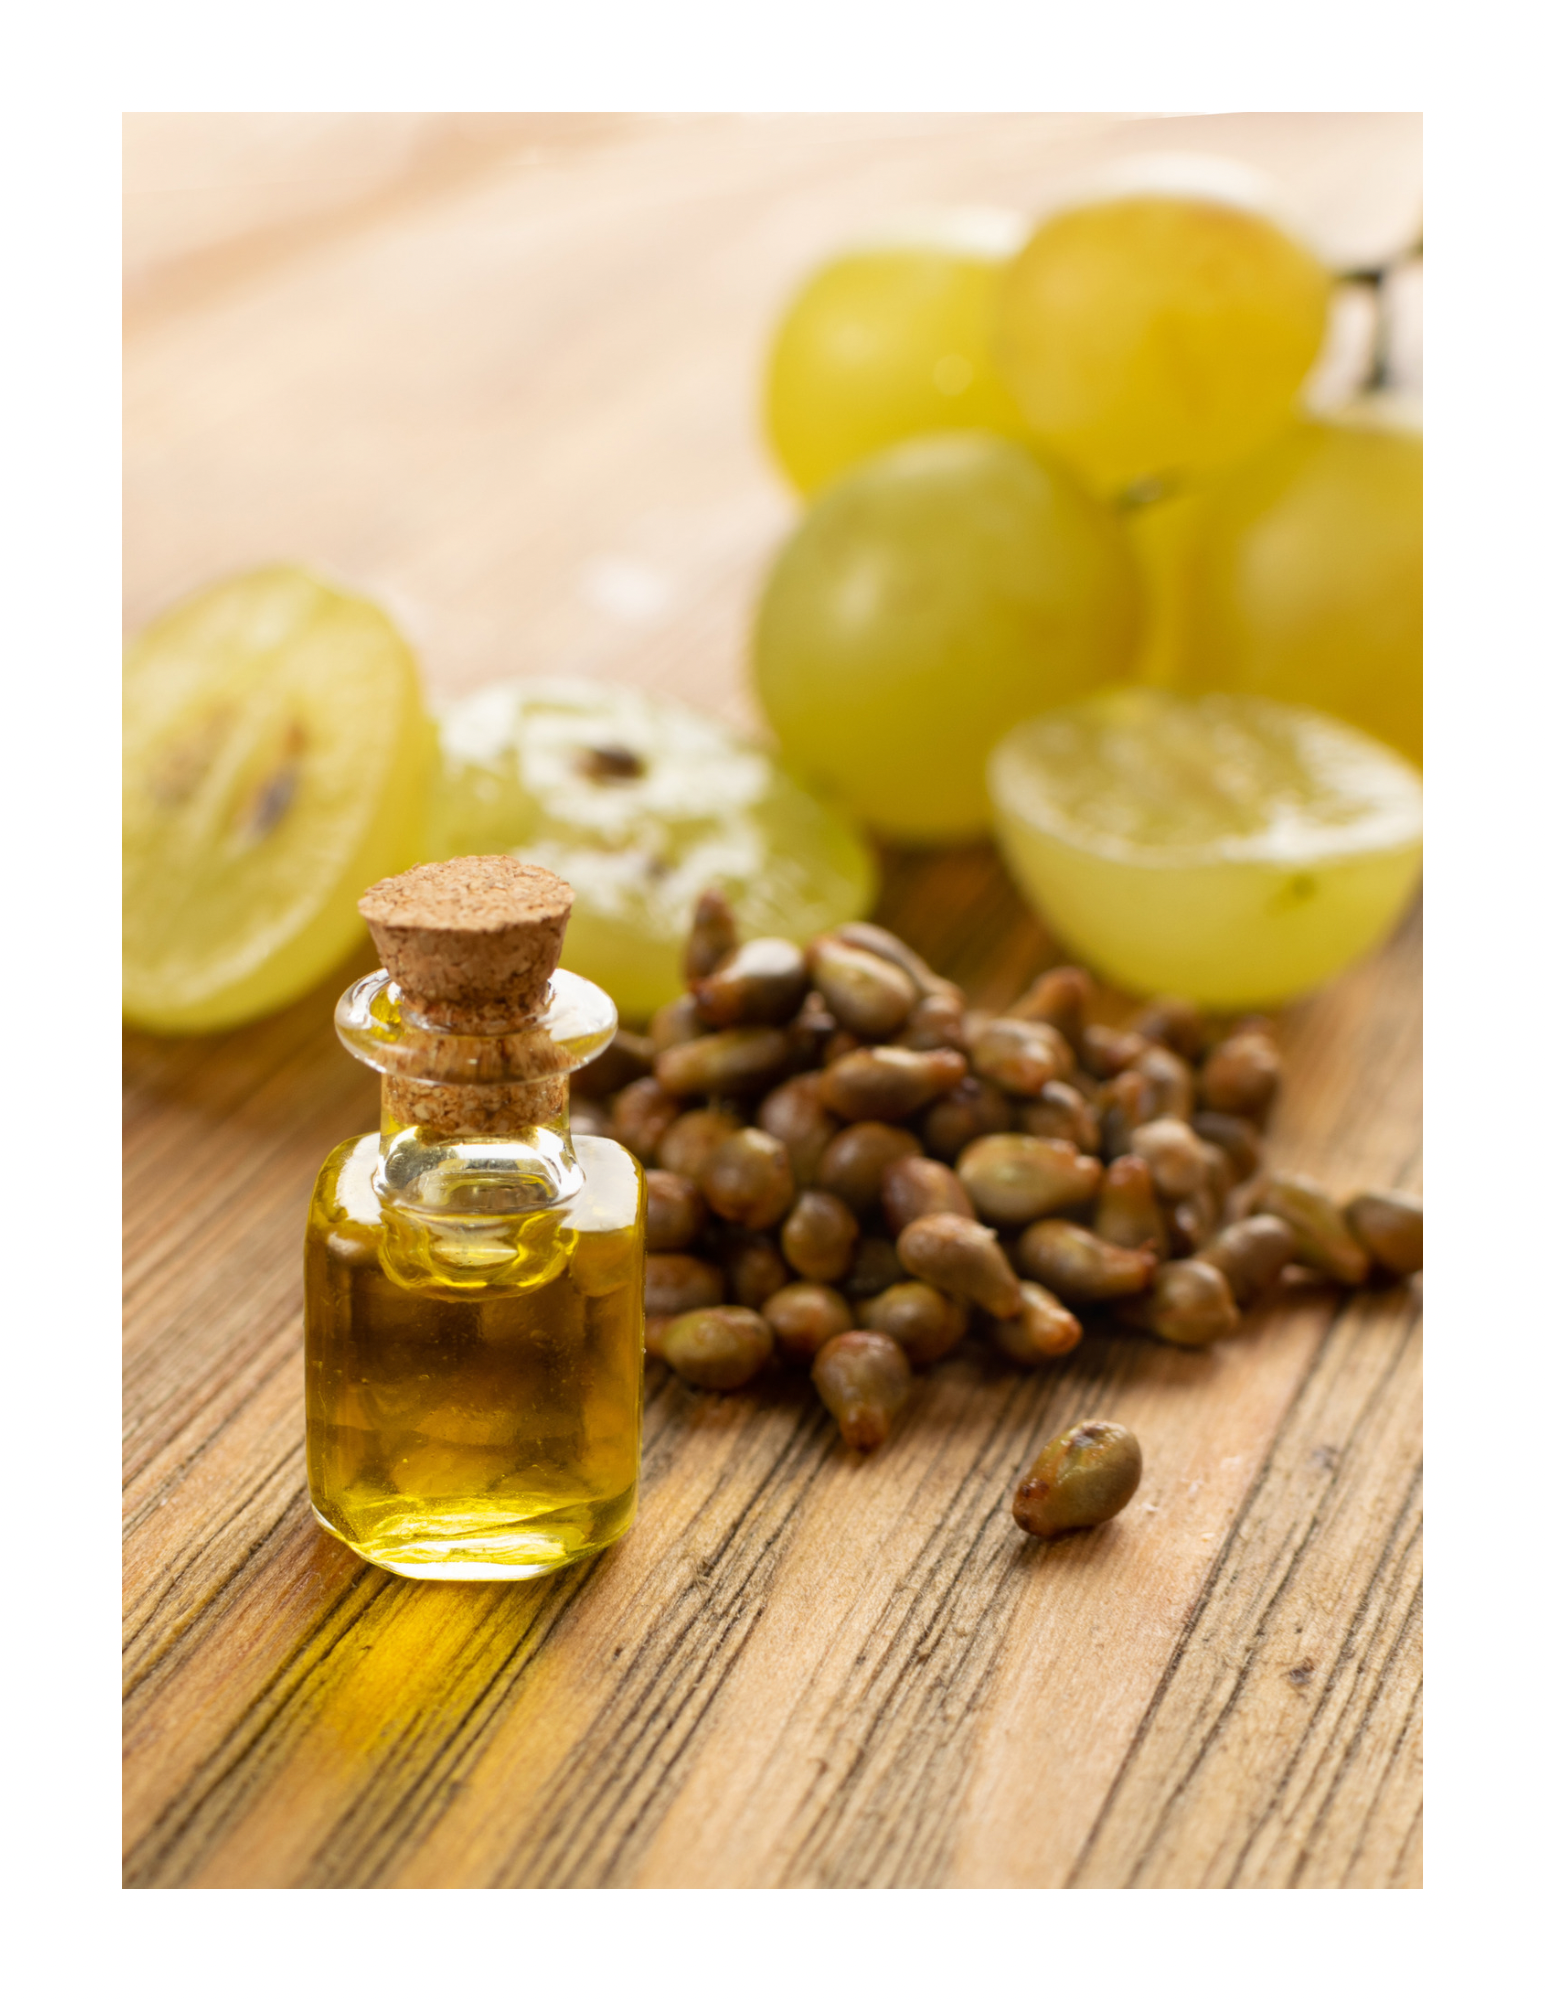 Say HELLO to my little "curl" friend: Grapeseed Oil